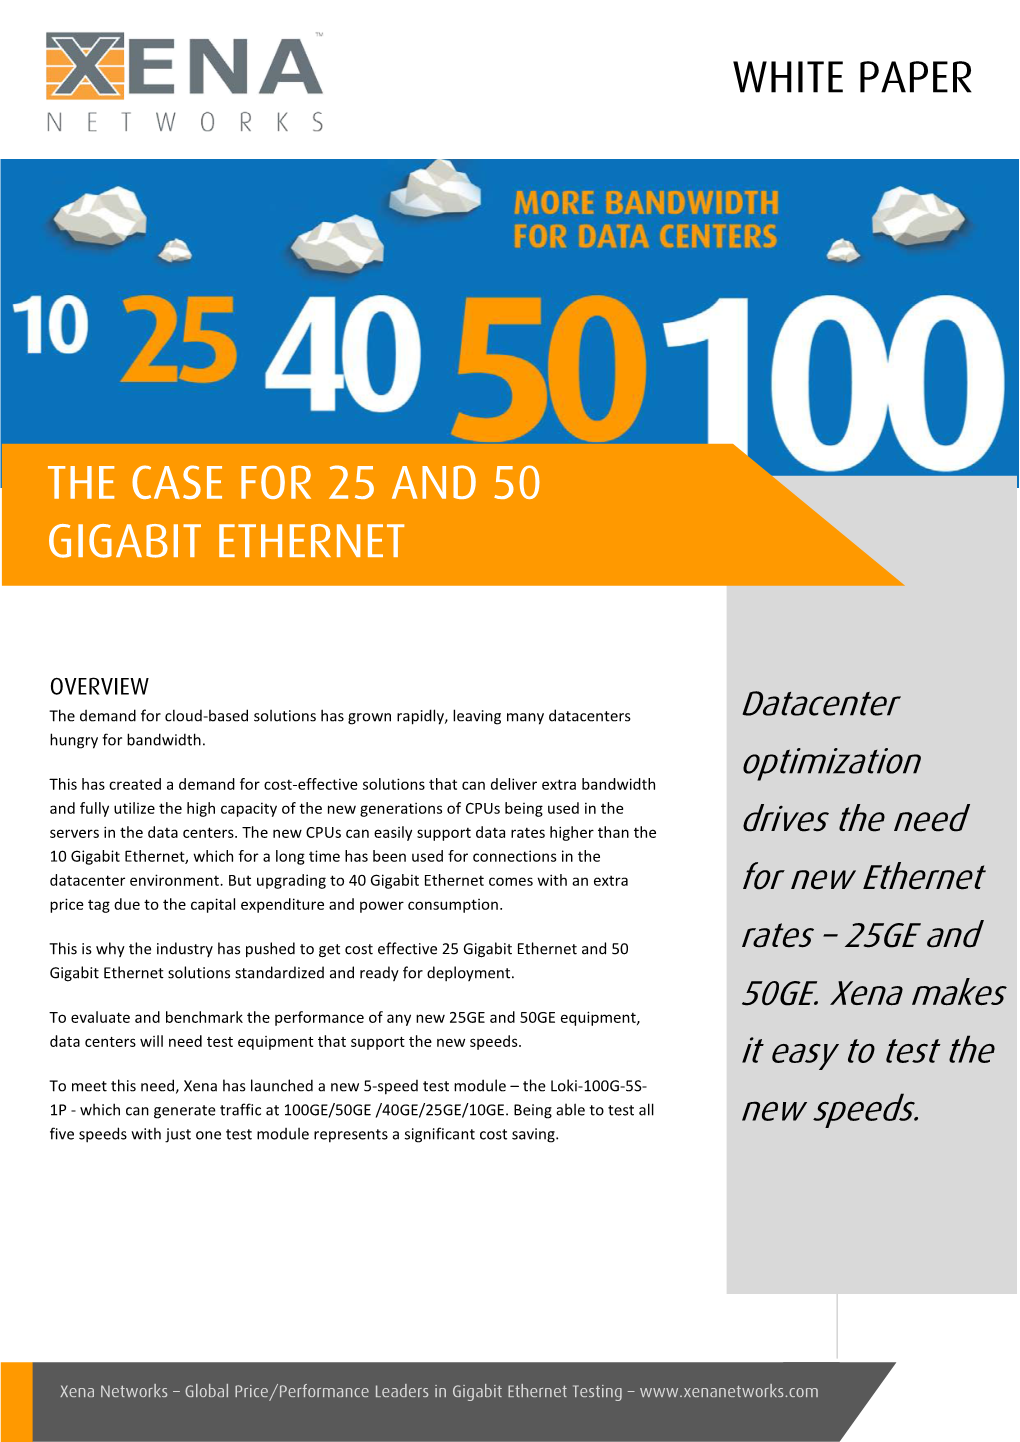 The Case for 25 and 50 Gigabit Ethernet